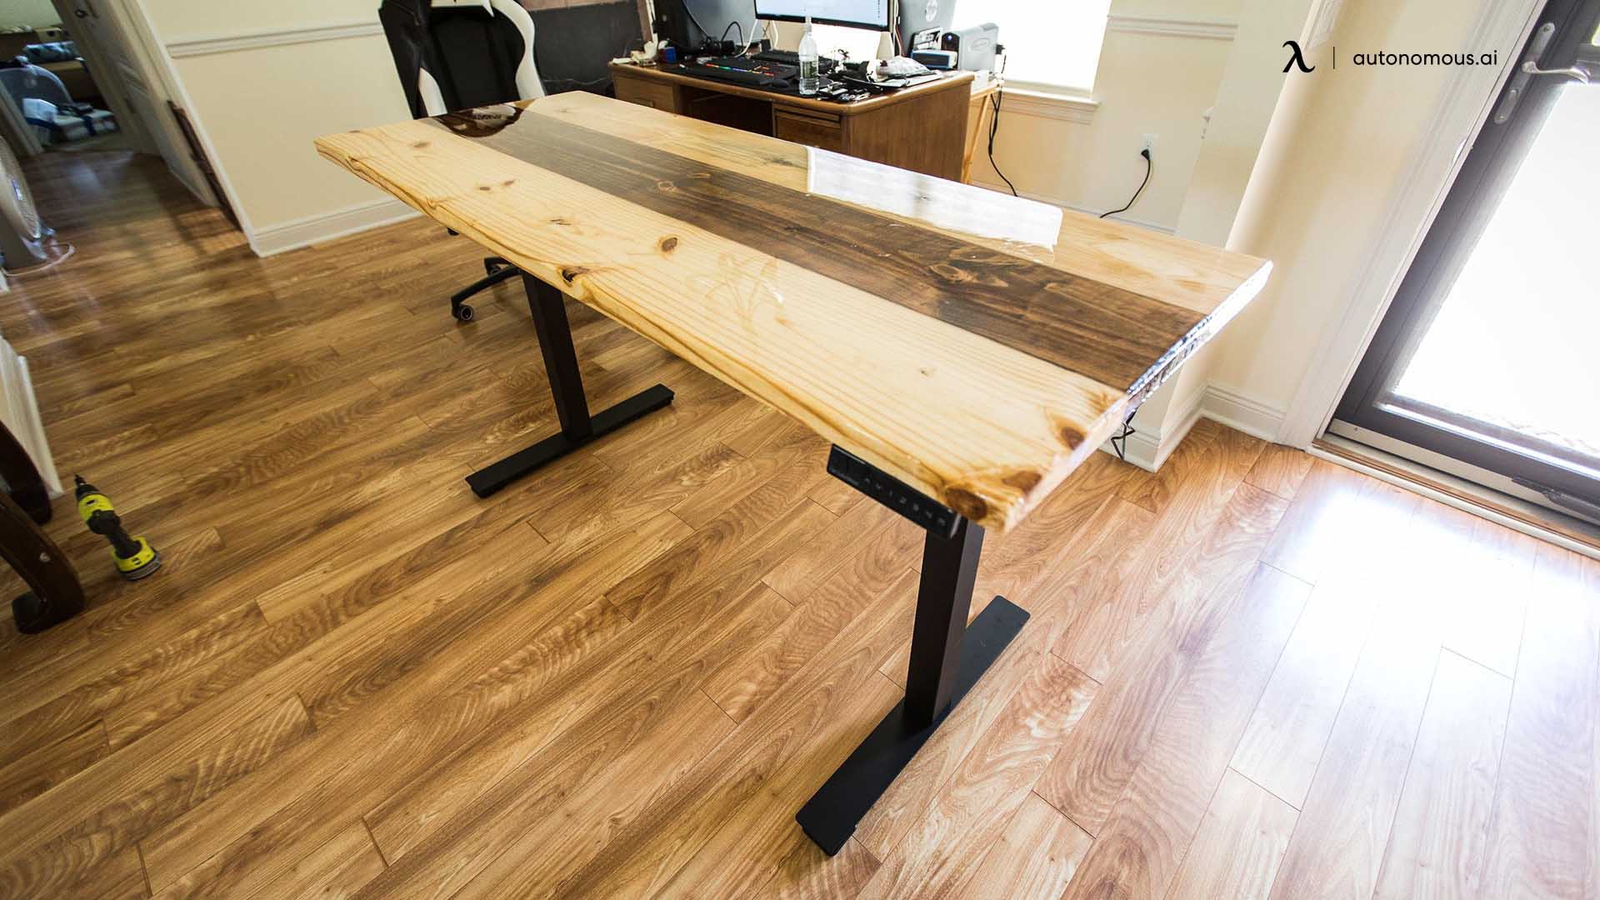 Why Should You Make A Standing Desk Yourself?